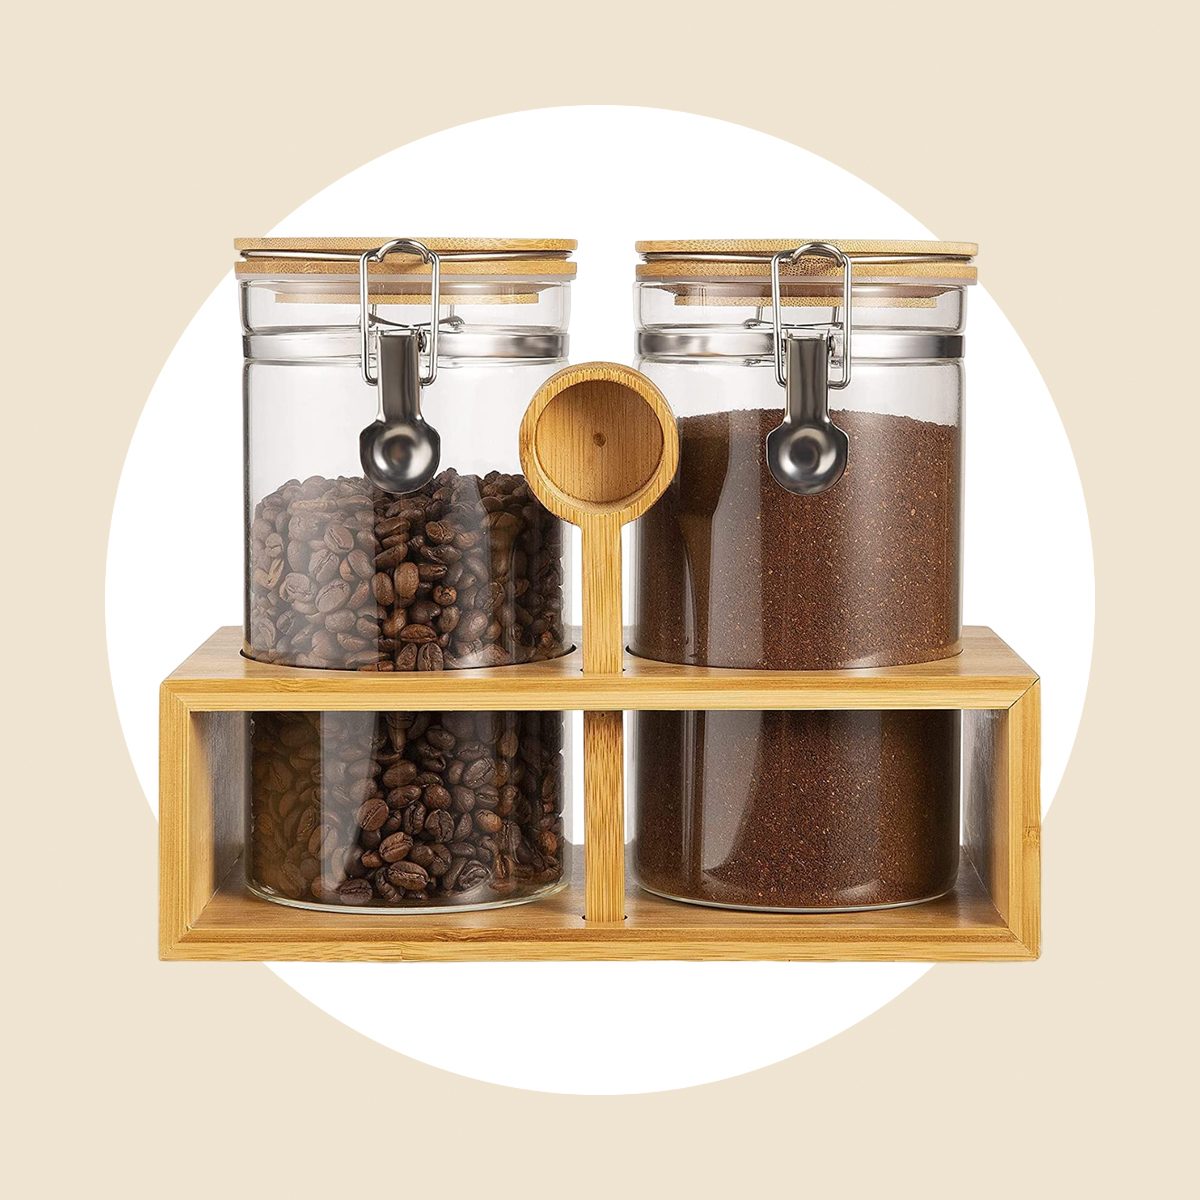 Coffee Storage Containers: Finding the Perfect Home for Your Beans